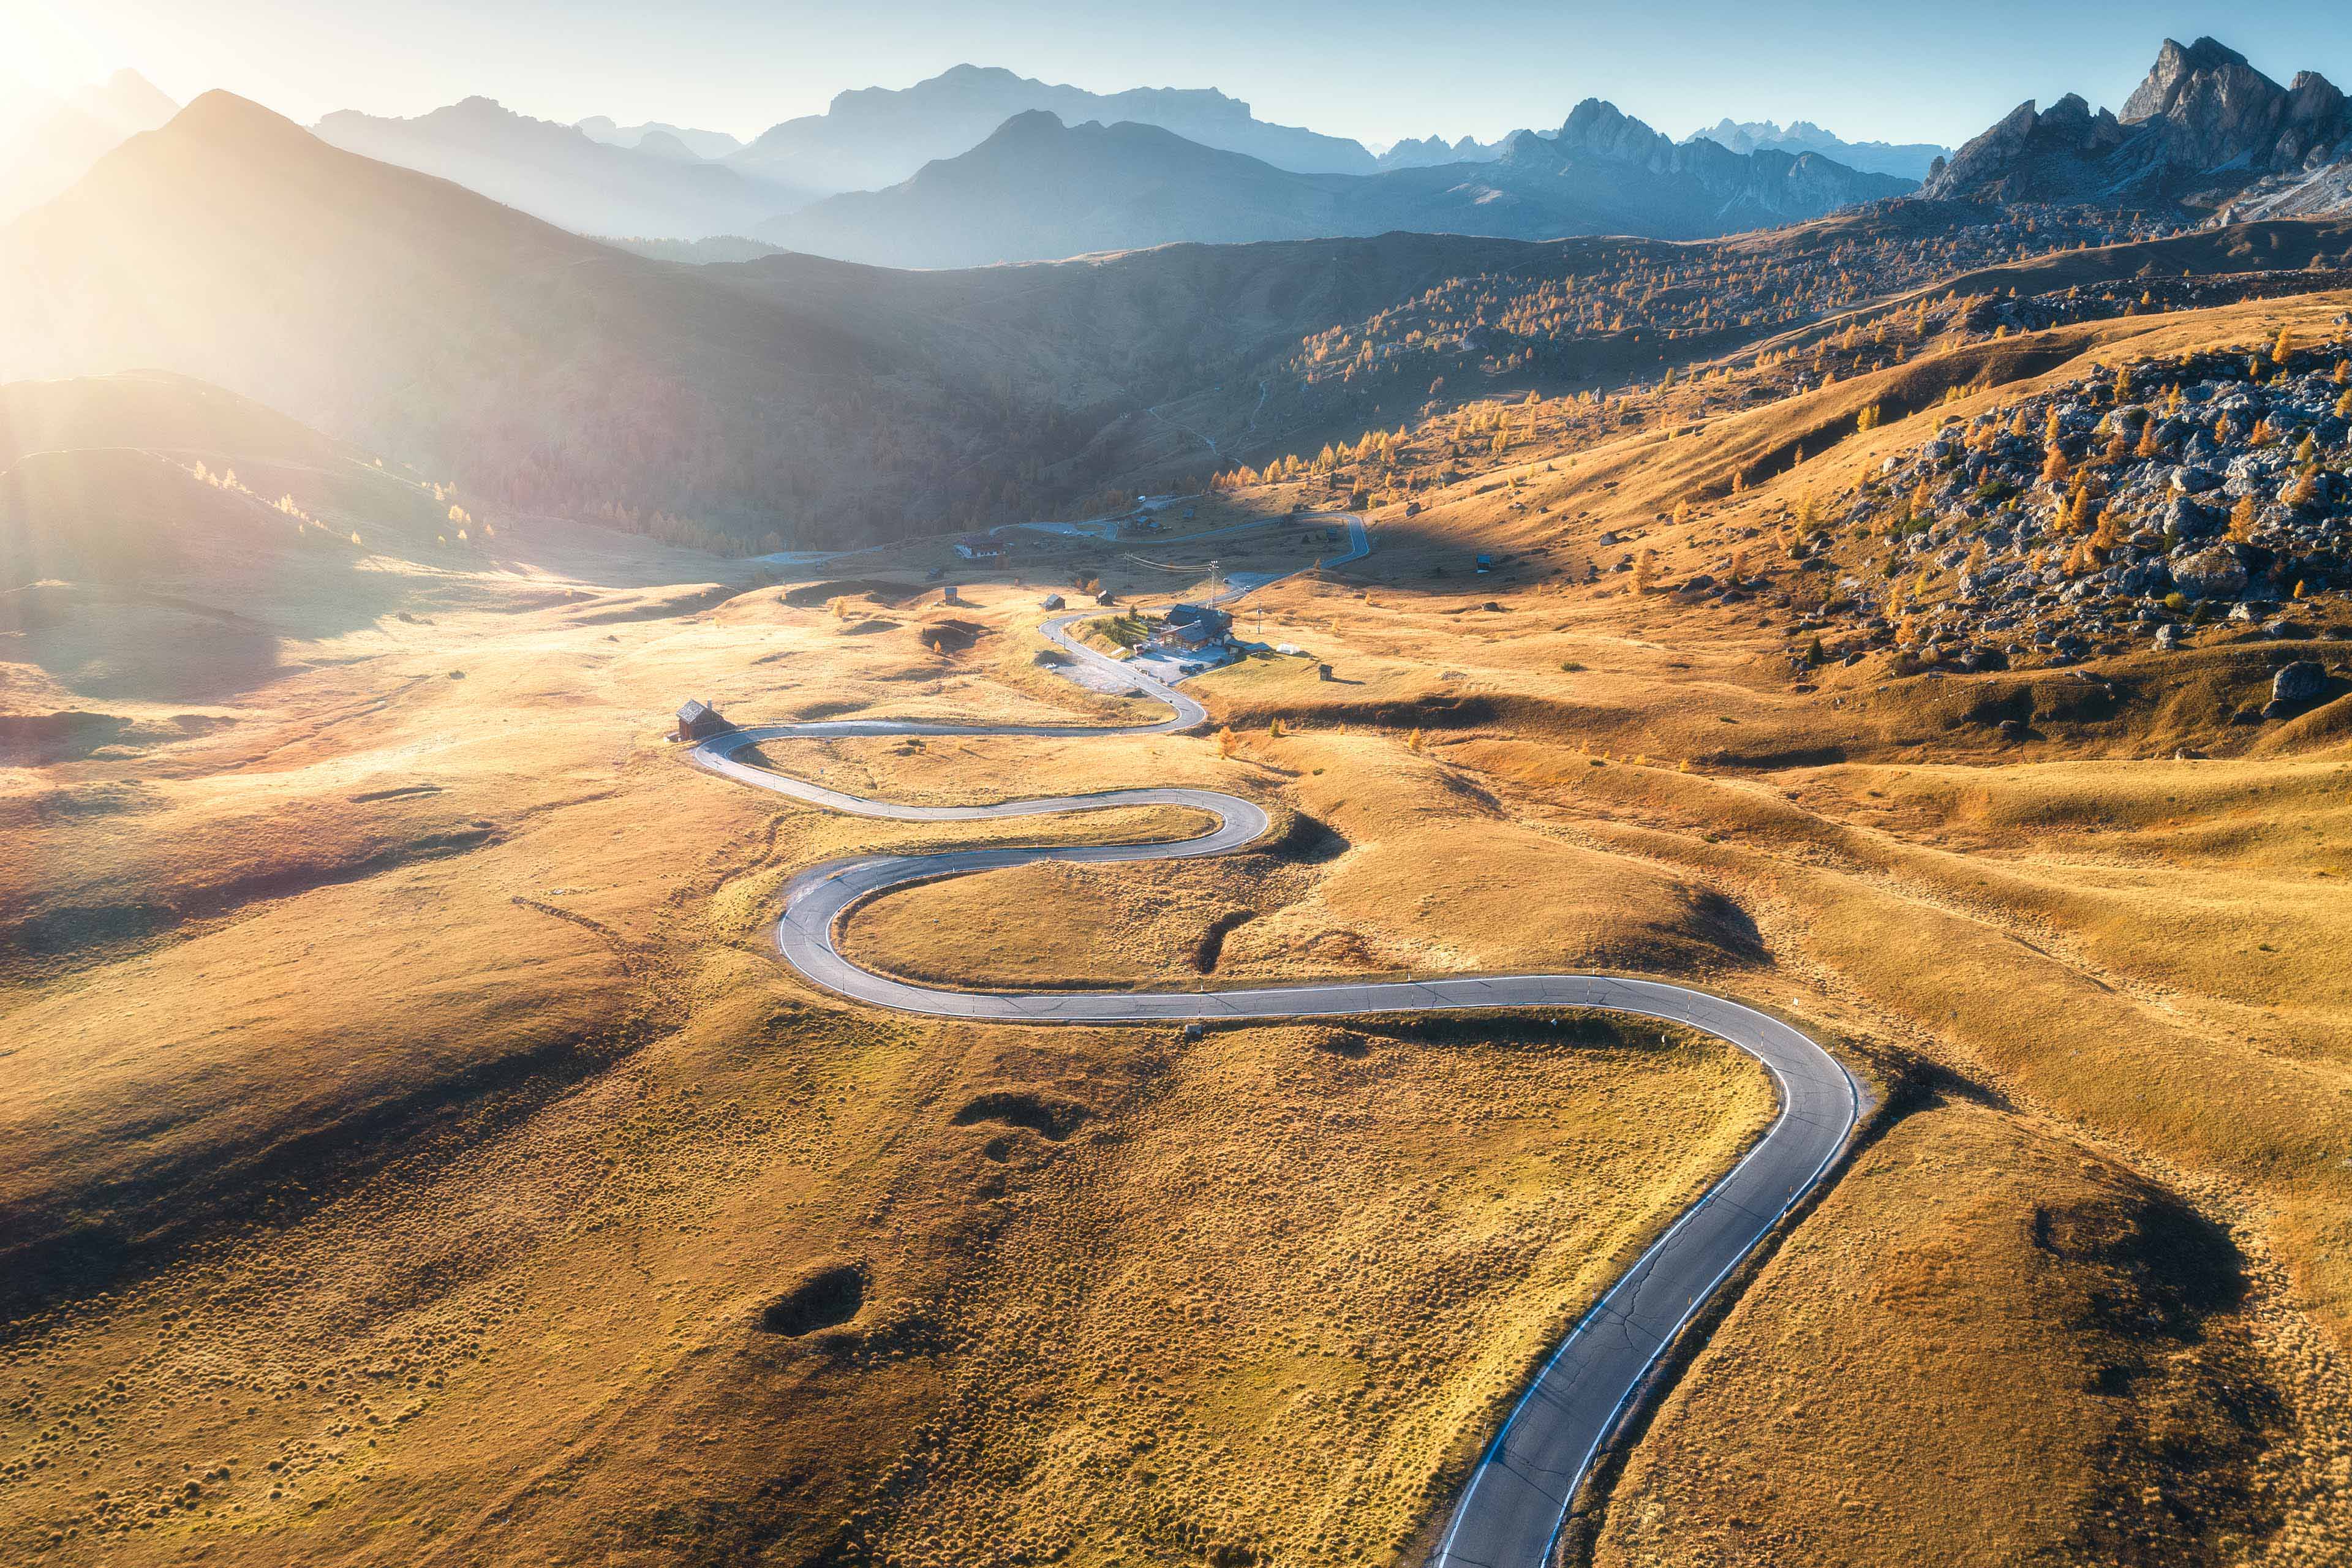 Winding road in mountain valley at sunset in autumn. Aerial view of asphalt road in Passo Giau. Dolomites, Italy. Top view of roadway, mountains, meadows with orange grass, blue sky and gold sunlight